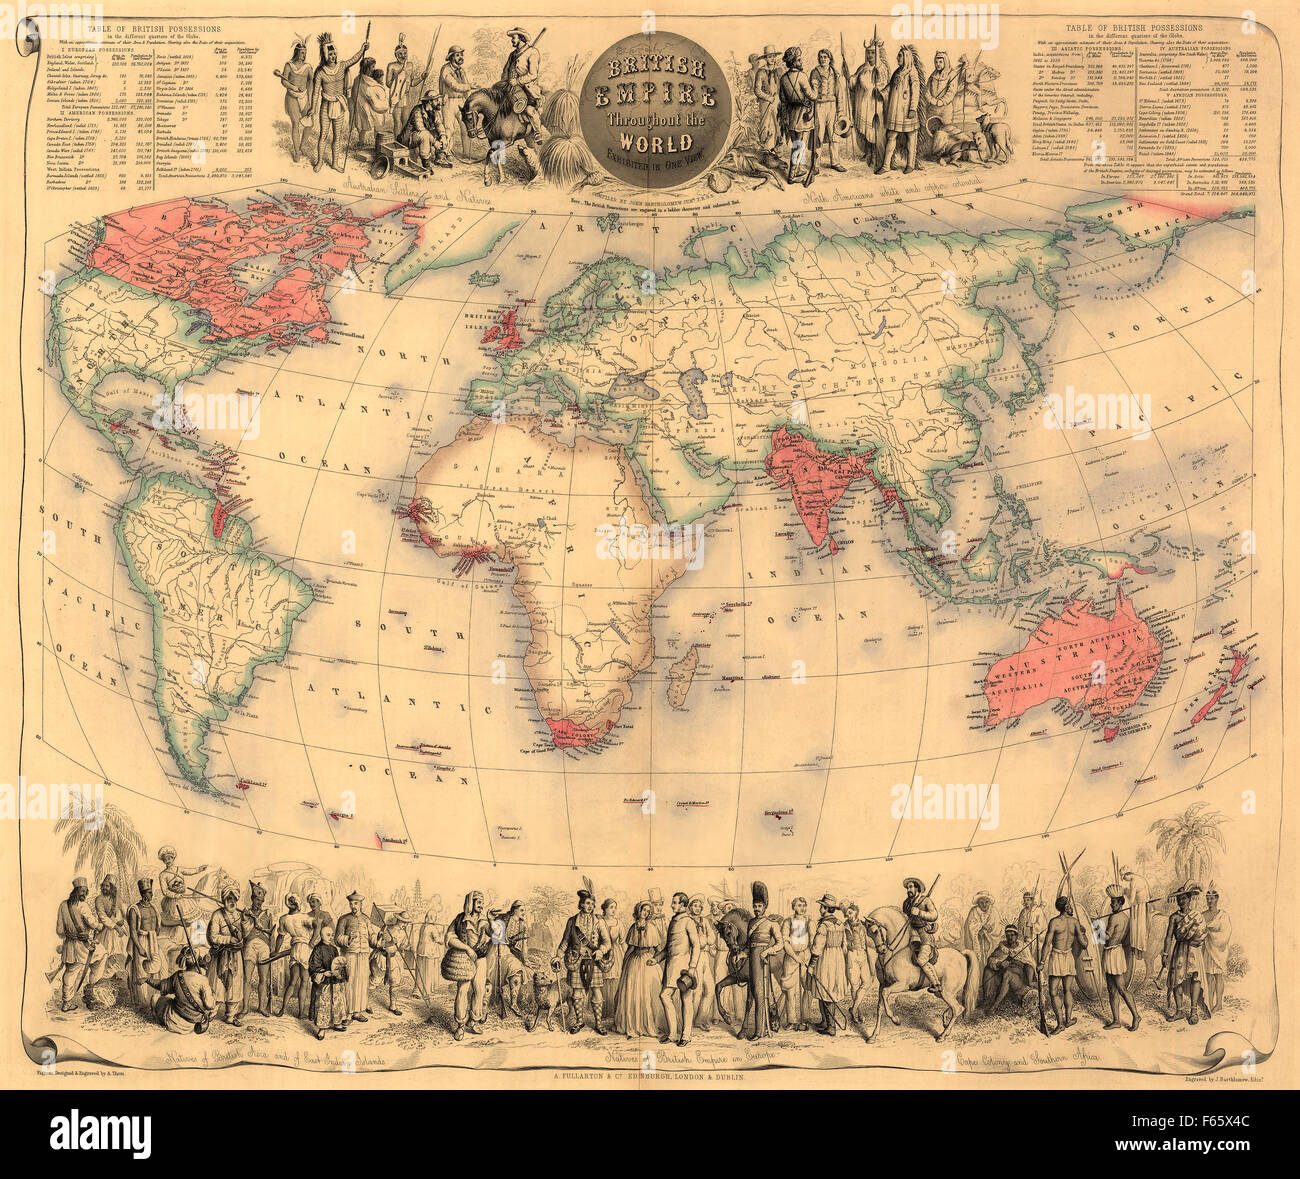 Map of the world circa 1870 with possessions of the British Empire coloured red.  The map first appeared in Fullarton's Royal Illustrated Atlas, published 1864. Stock Photo